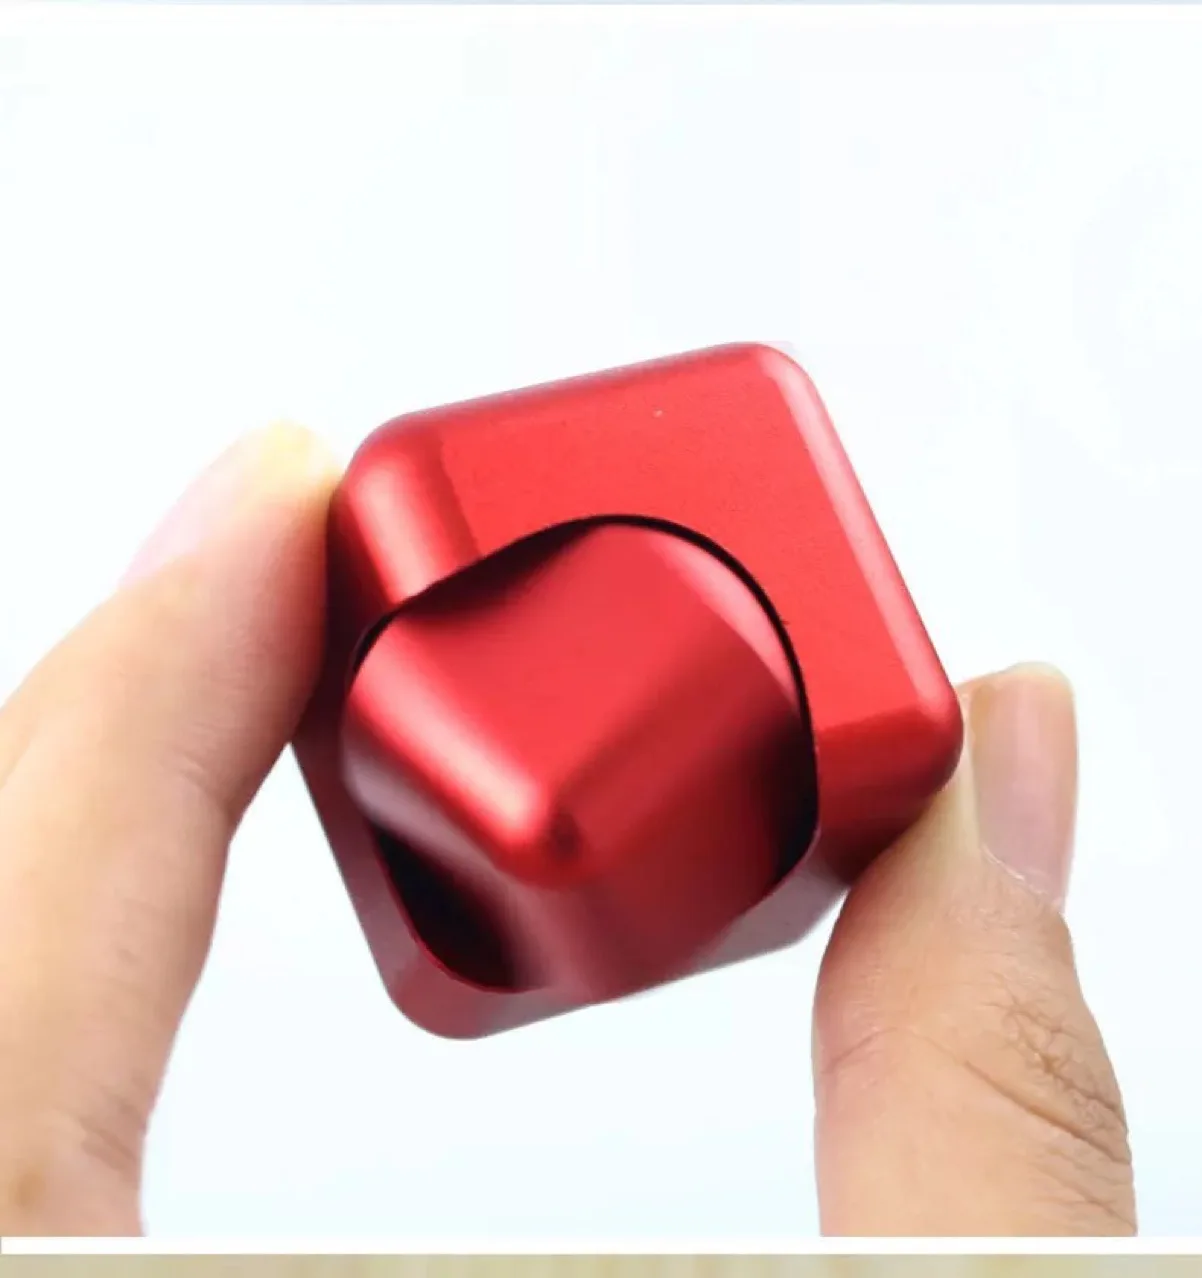 DPG-3 New Pressure - Reducing Finger Gyro Cool Rreative Gifts Novel Toys Metal Color Fun leisure Relieves Stress enlarge